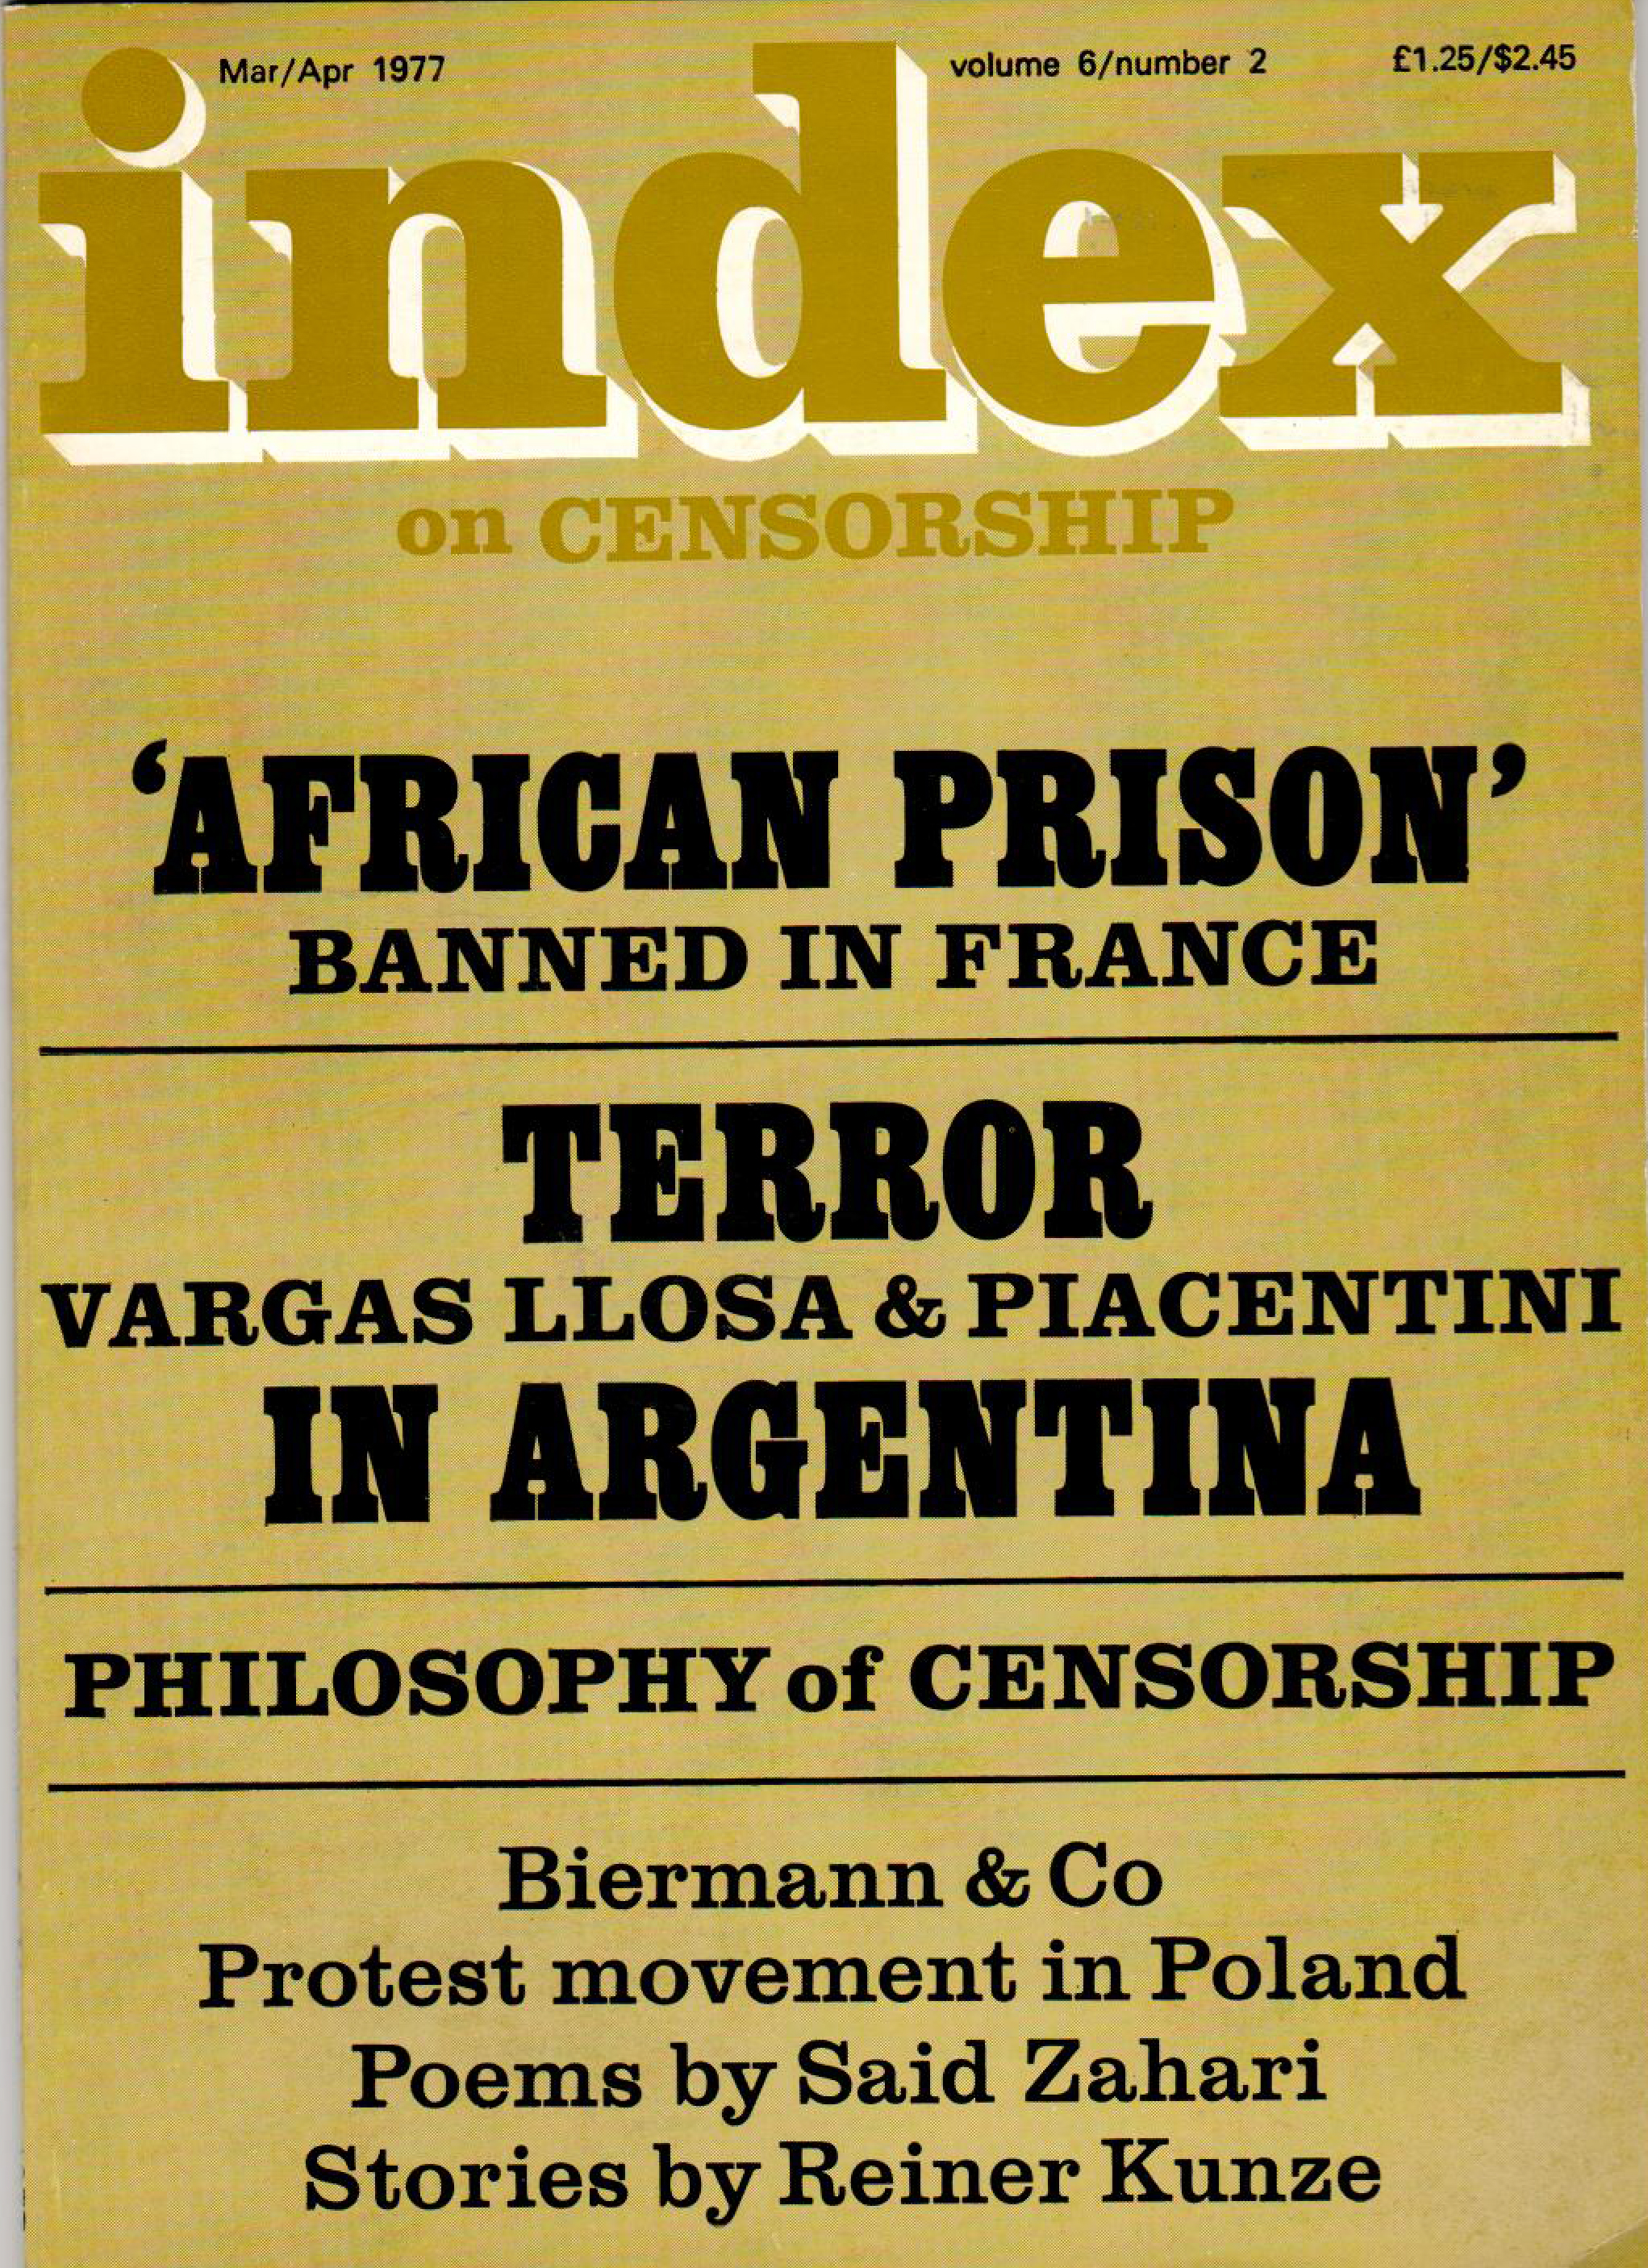 'African prison' banned in France, the March 1977 issue of Index on Censorship